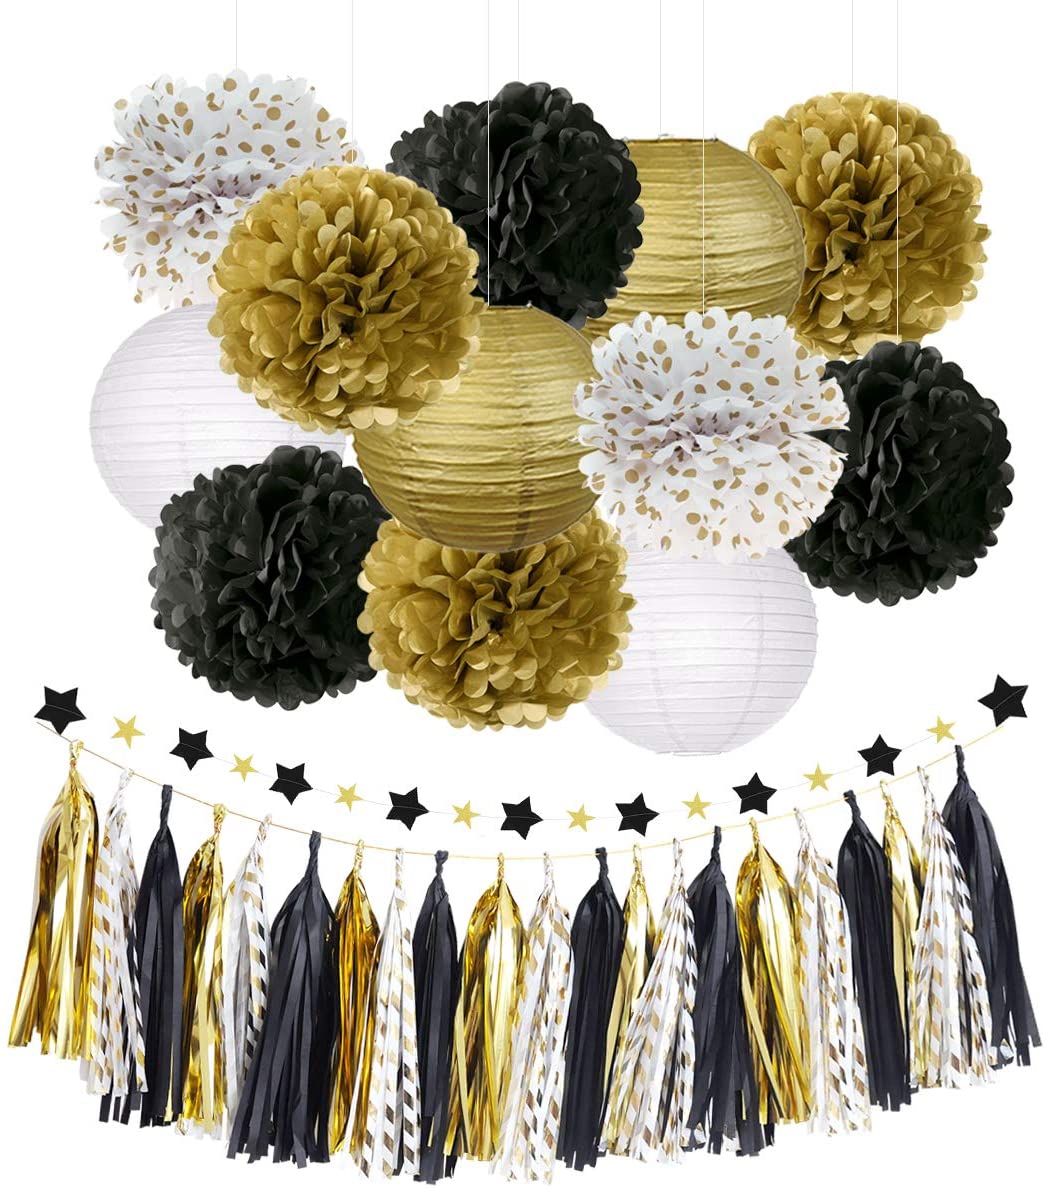 NICROLANDEE Black and Gold Party Decorations Black Gold Tissue Paper Pom  Poms Flowers Hanging Paper Lanterns Star Garland Tassel for Happy New Year  Decorations 2022, Wedding, Birthday, Prom Party – Homefurniturelife Online  Store